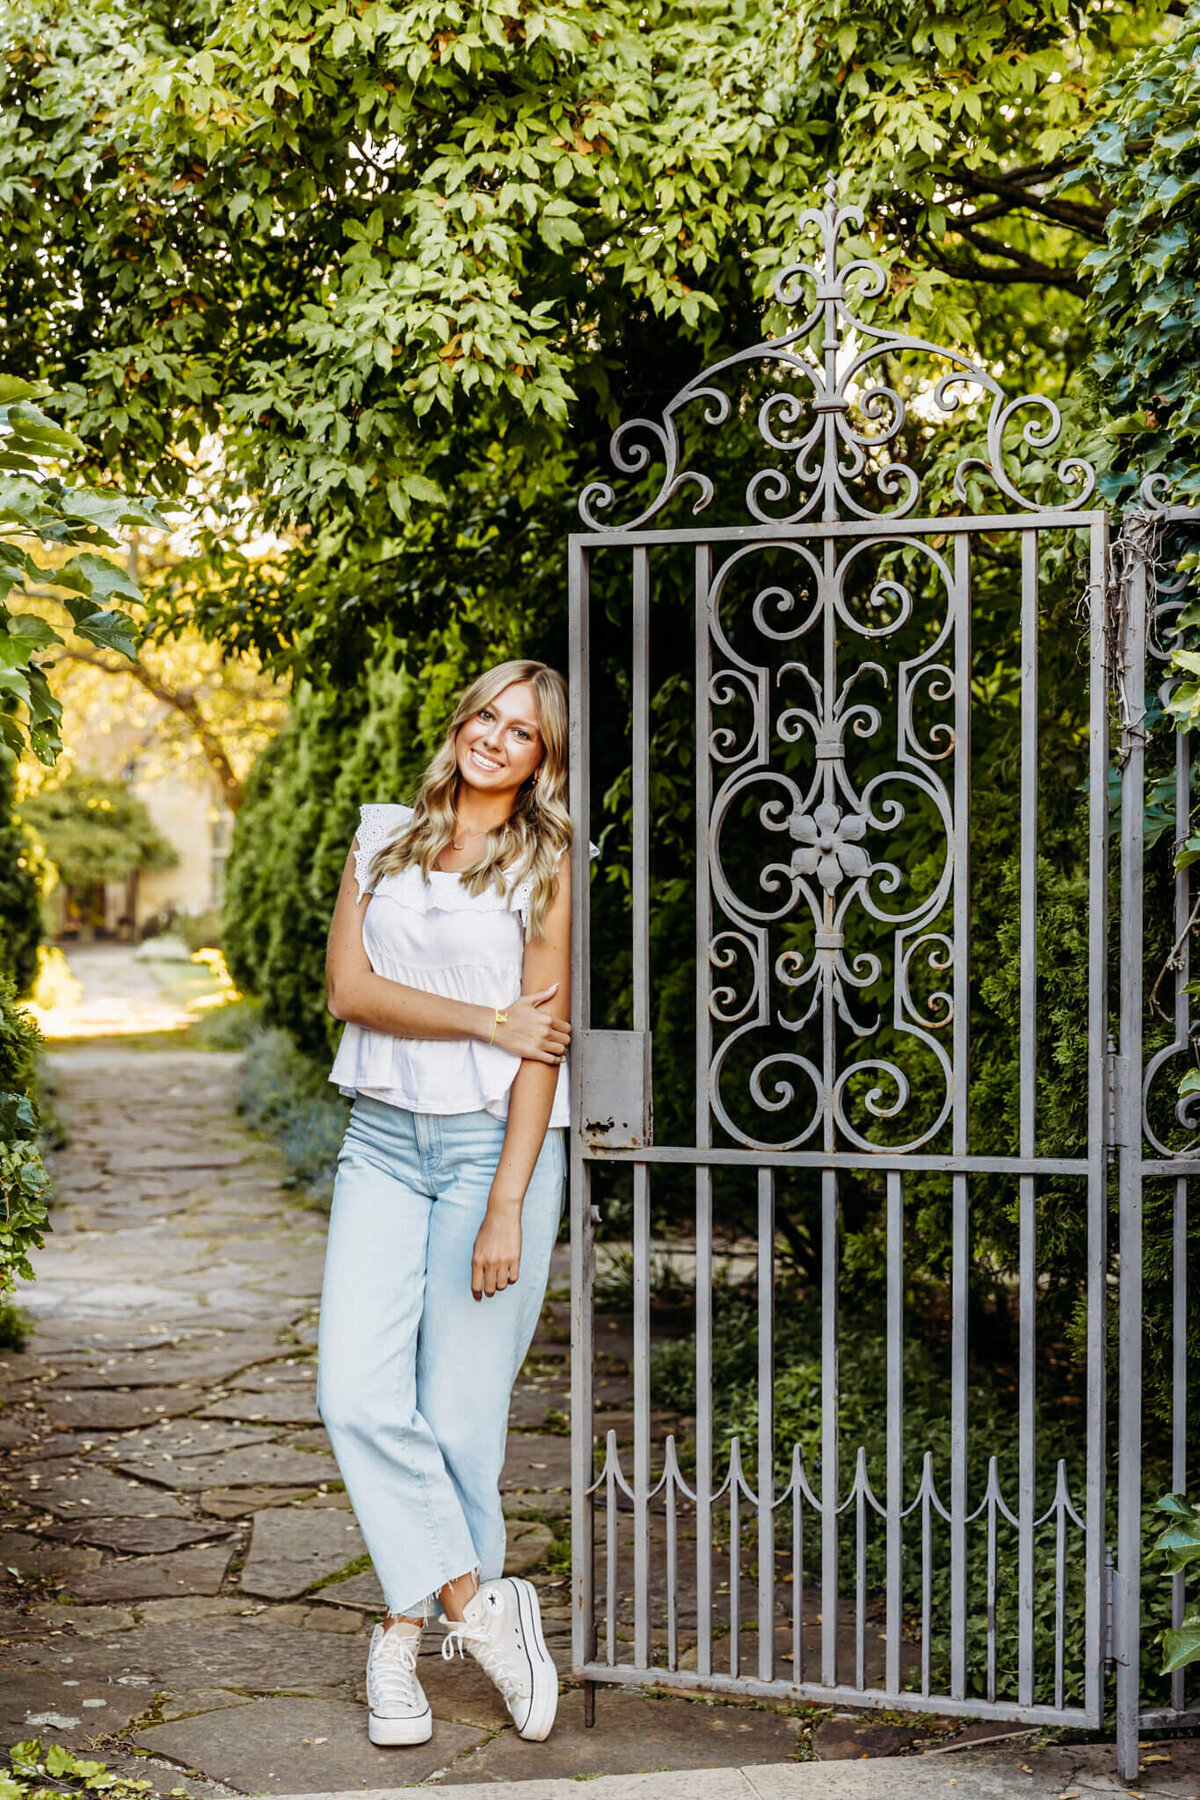 high school girl in a white top and jeans leaning against a garden gate while holding her left arm